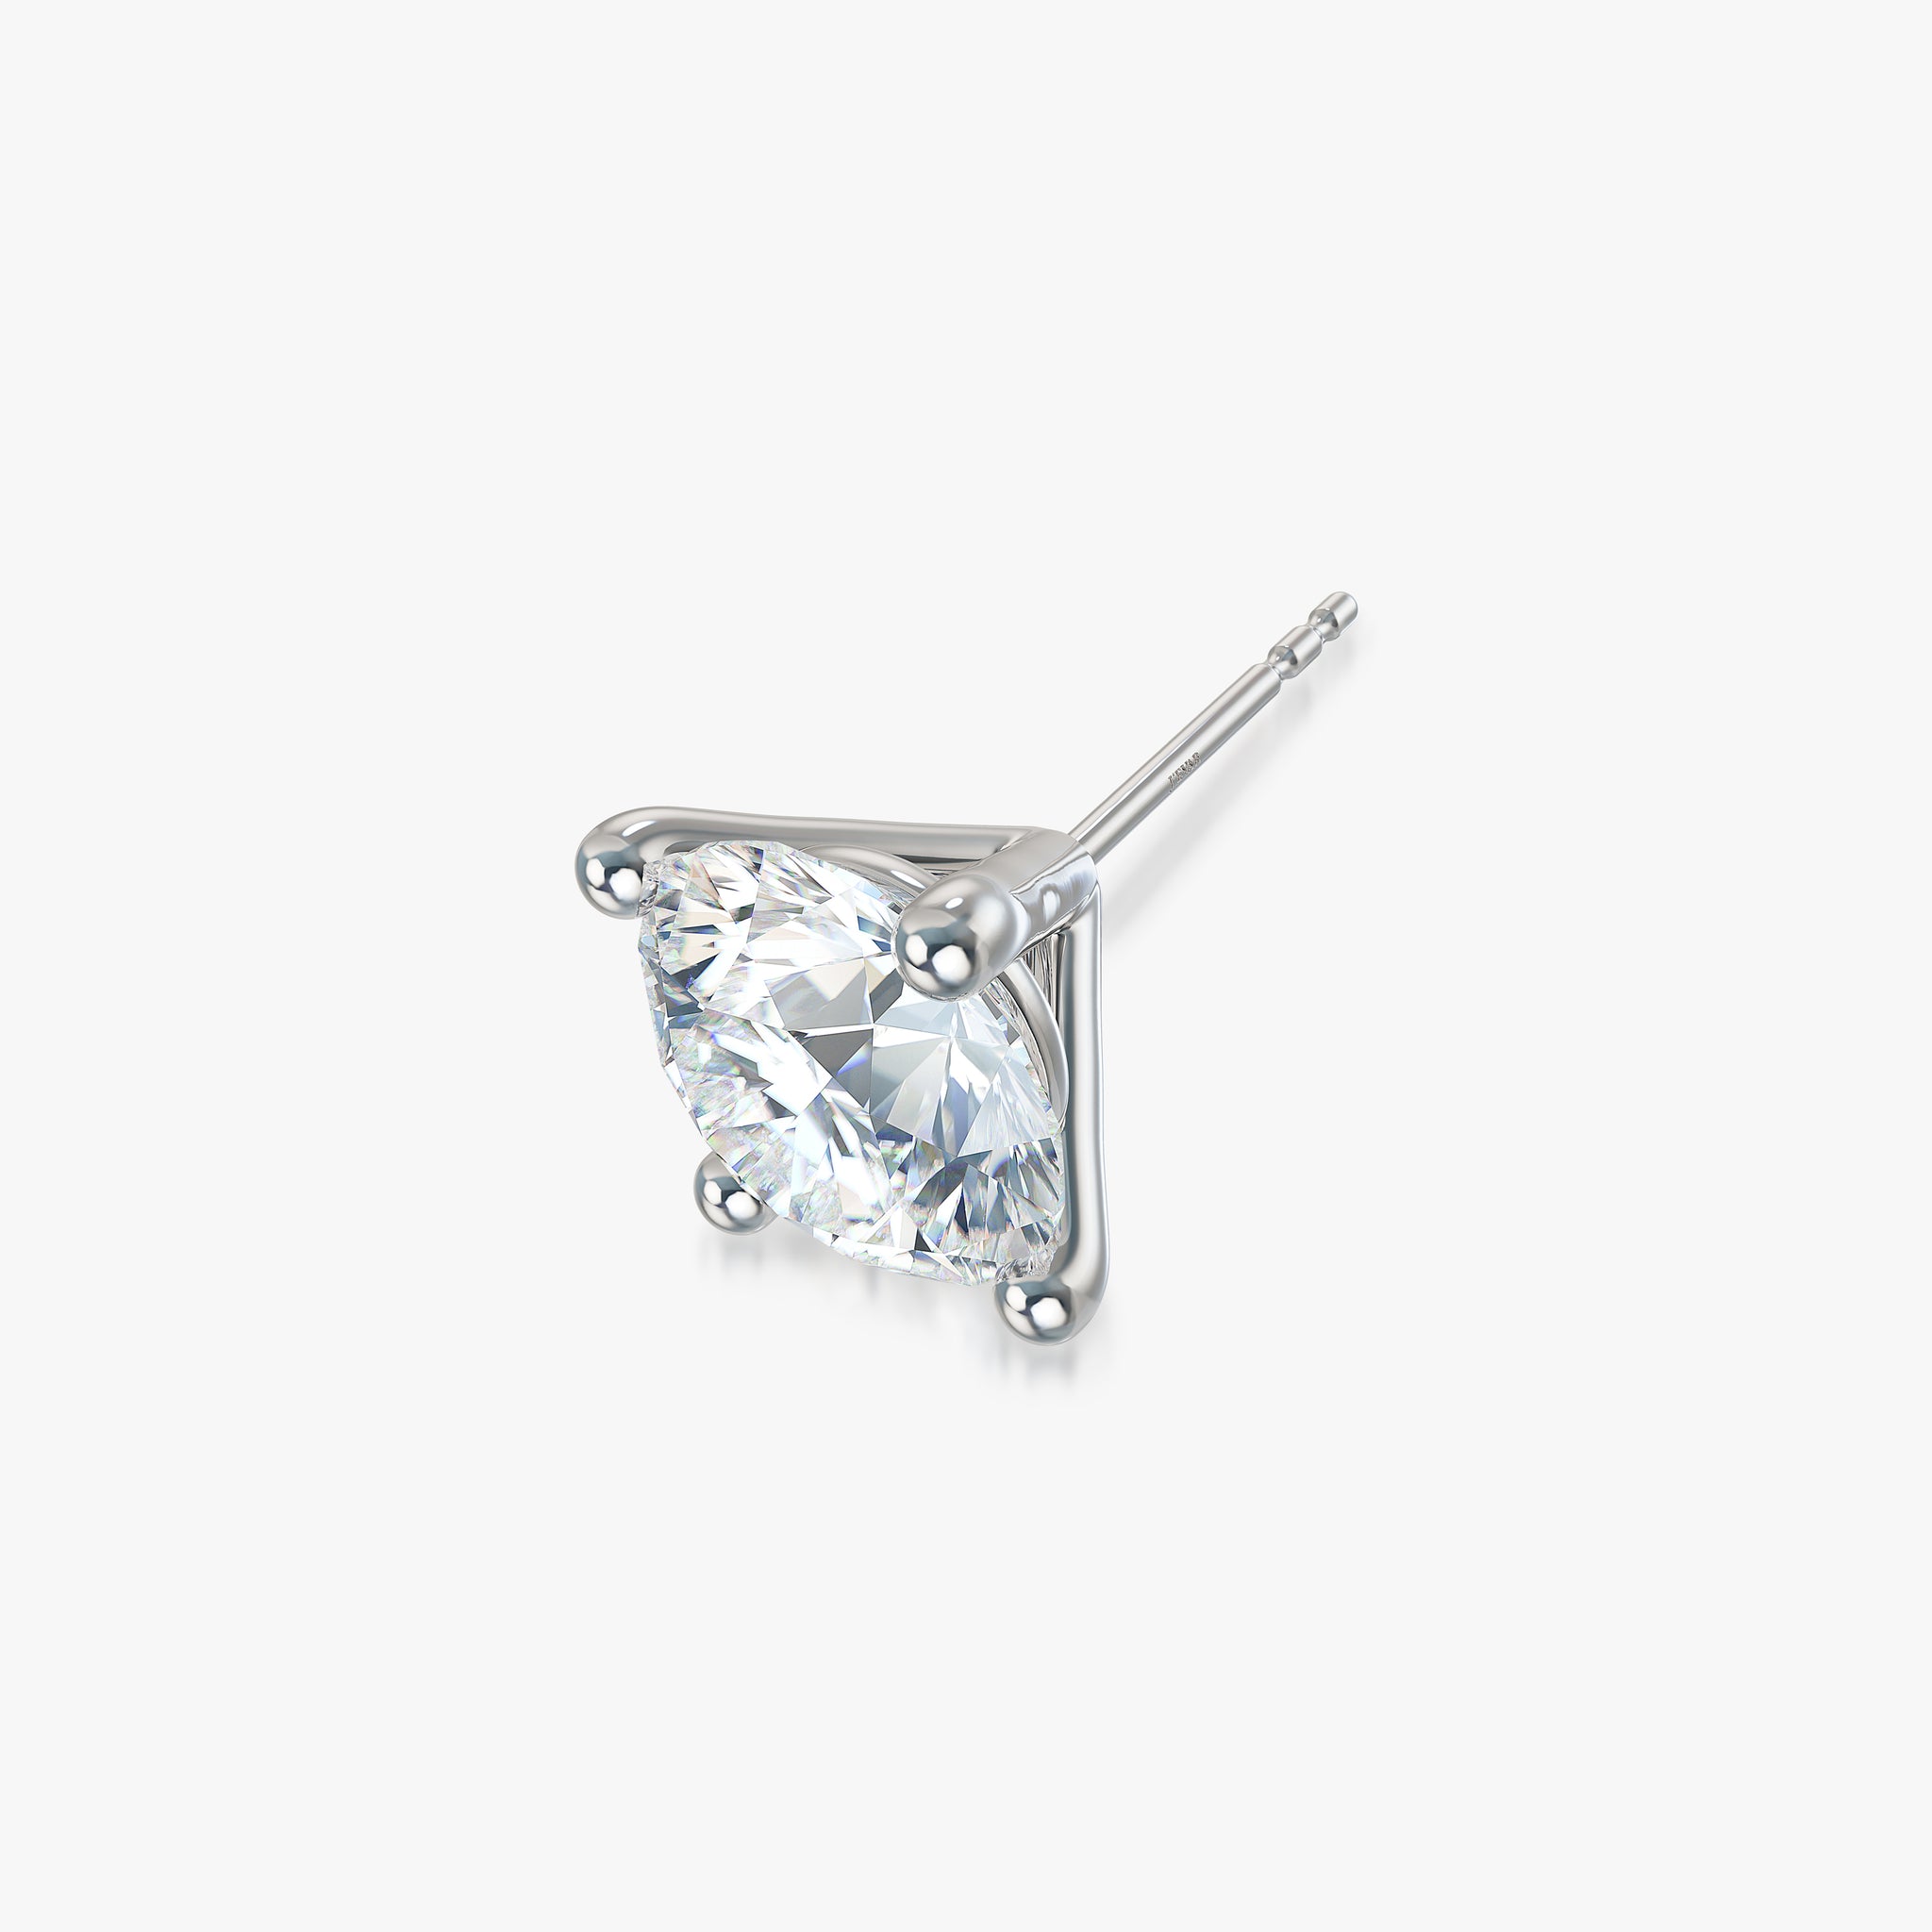 J'EVAR 18KT White Gold ALTR Lab Grown Diamond Stud Earrings with Guardian Backs Perspective View